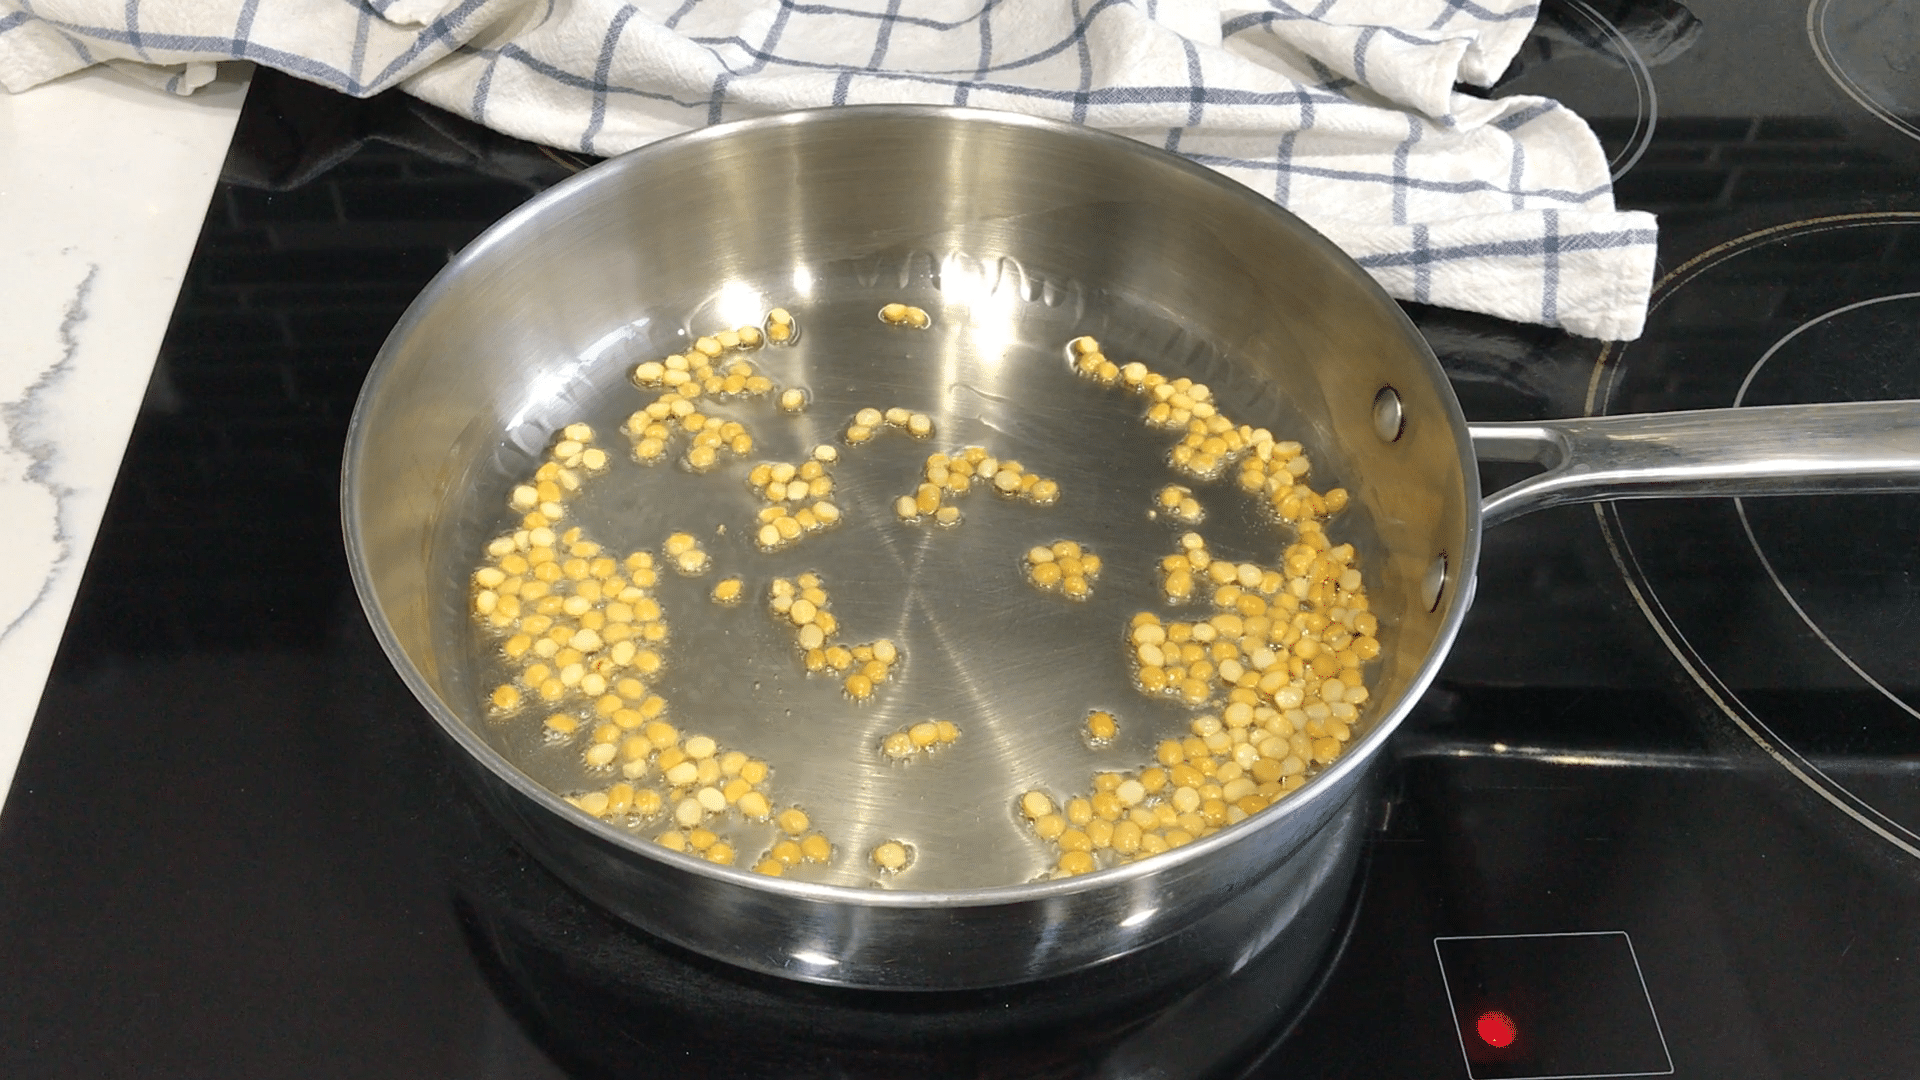 A pan on the stovetop with oil and spices